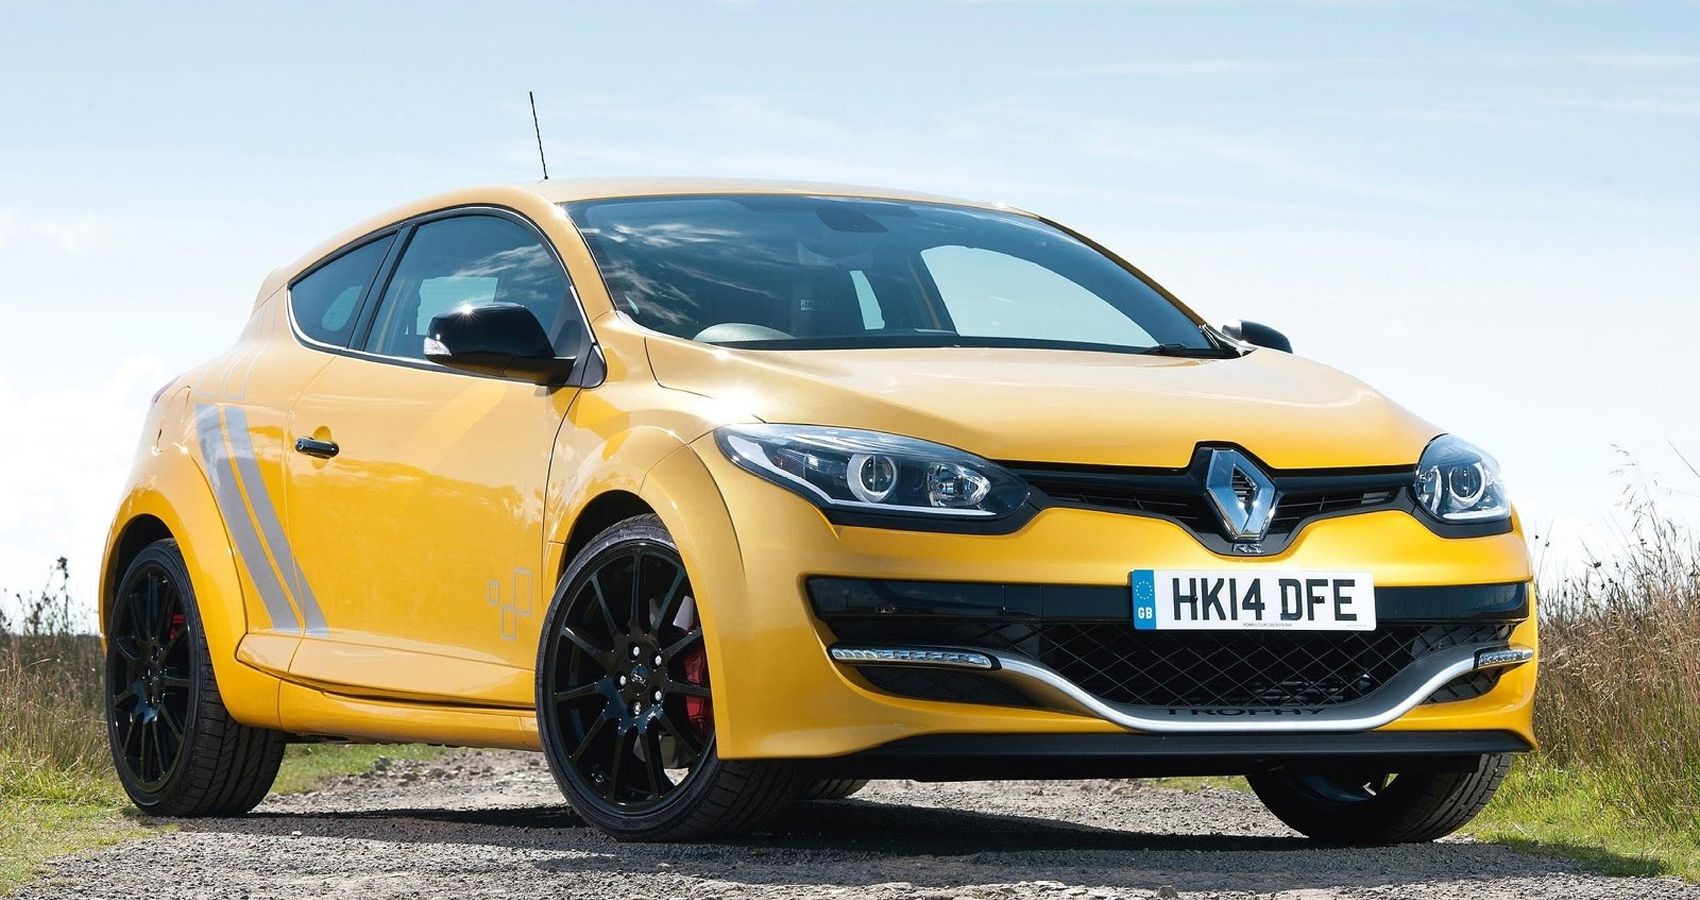 The front of the Megane RS 275